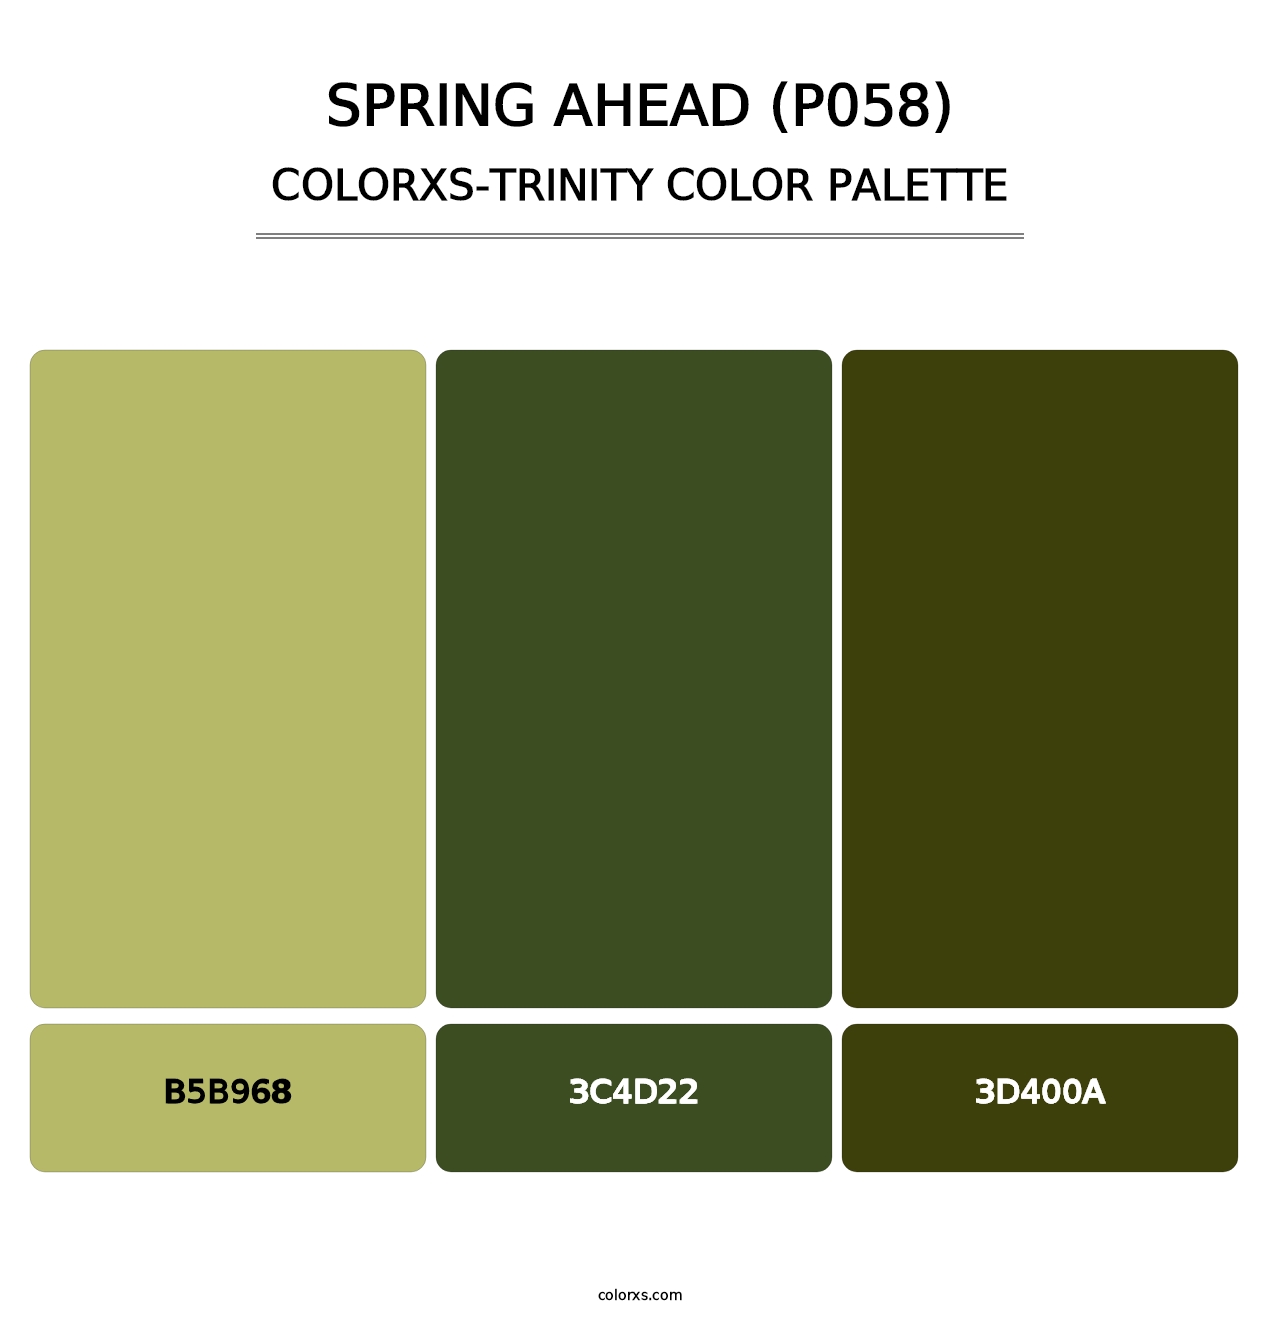 Spring Ahead (P058) - Colorxs Trinity Palette